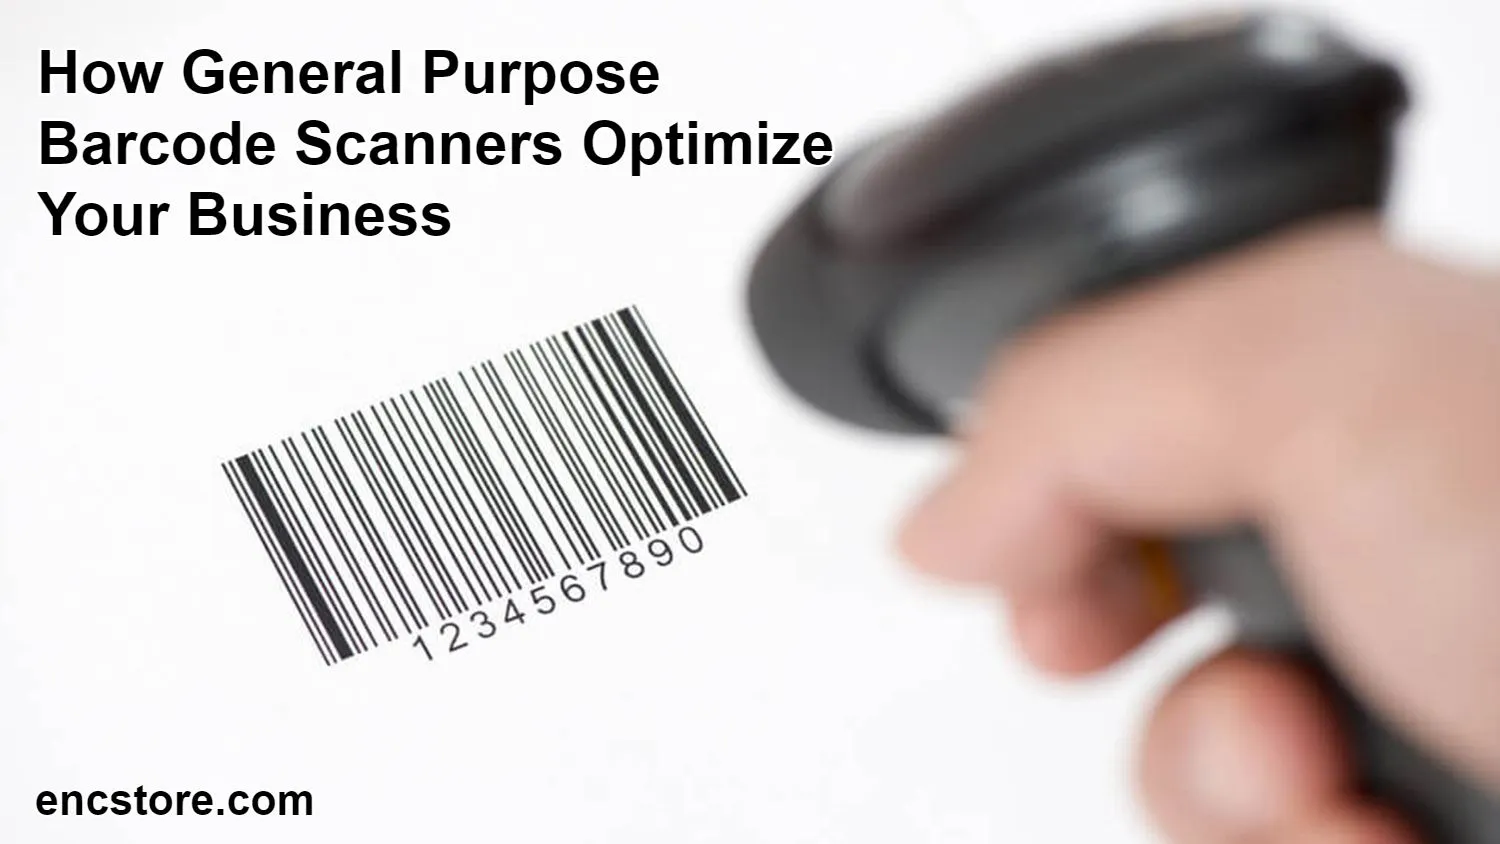 Barcode Scanners Optimize Your Business